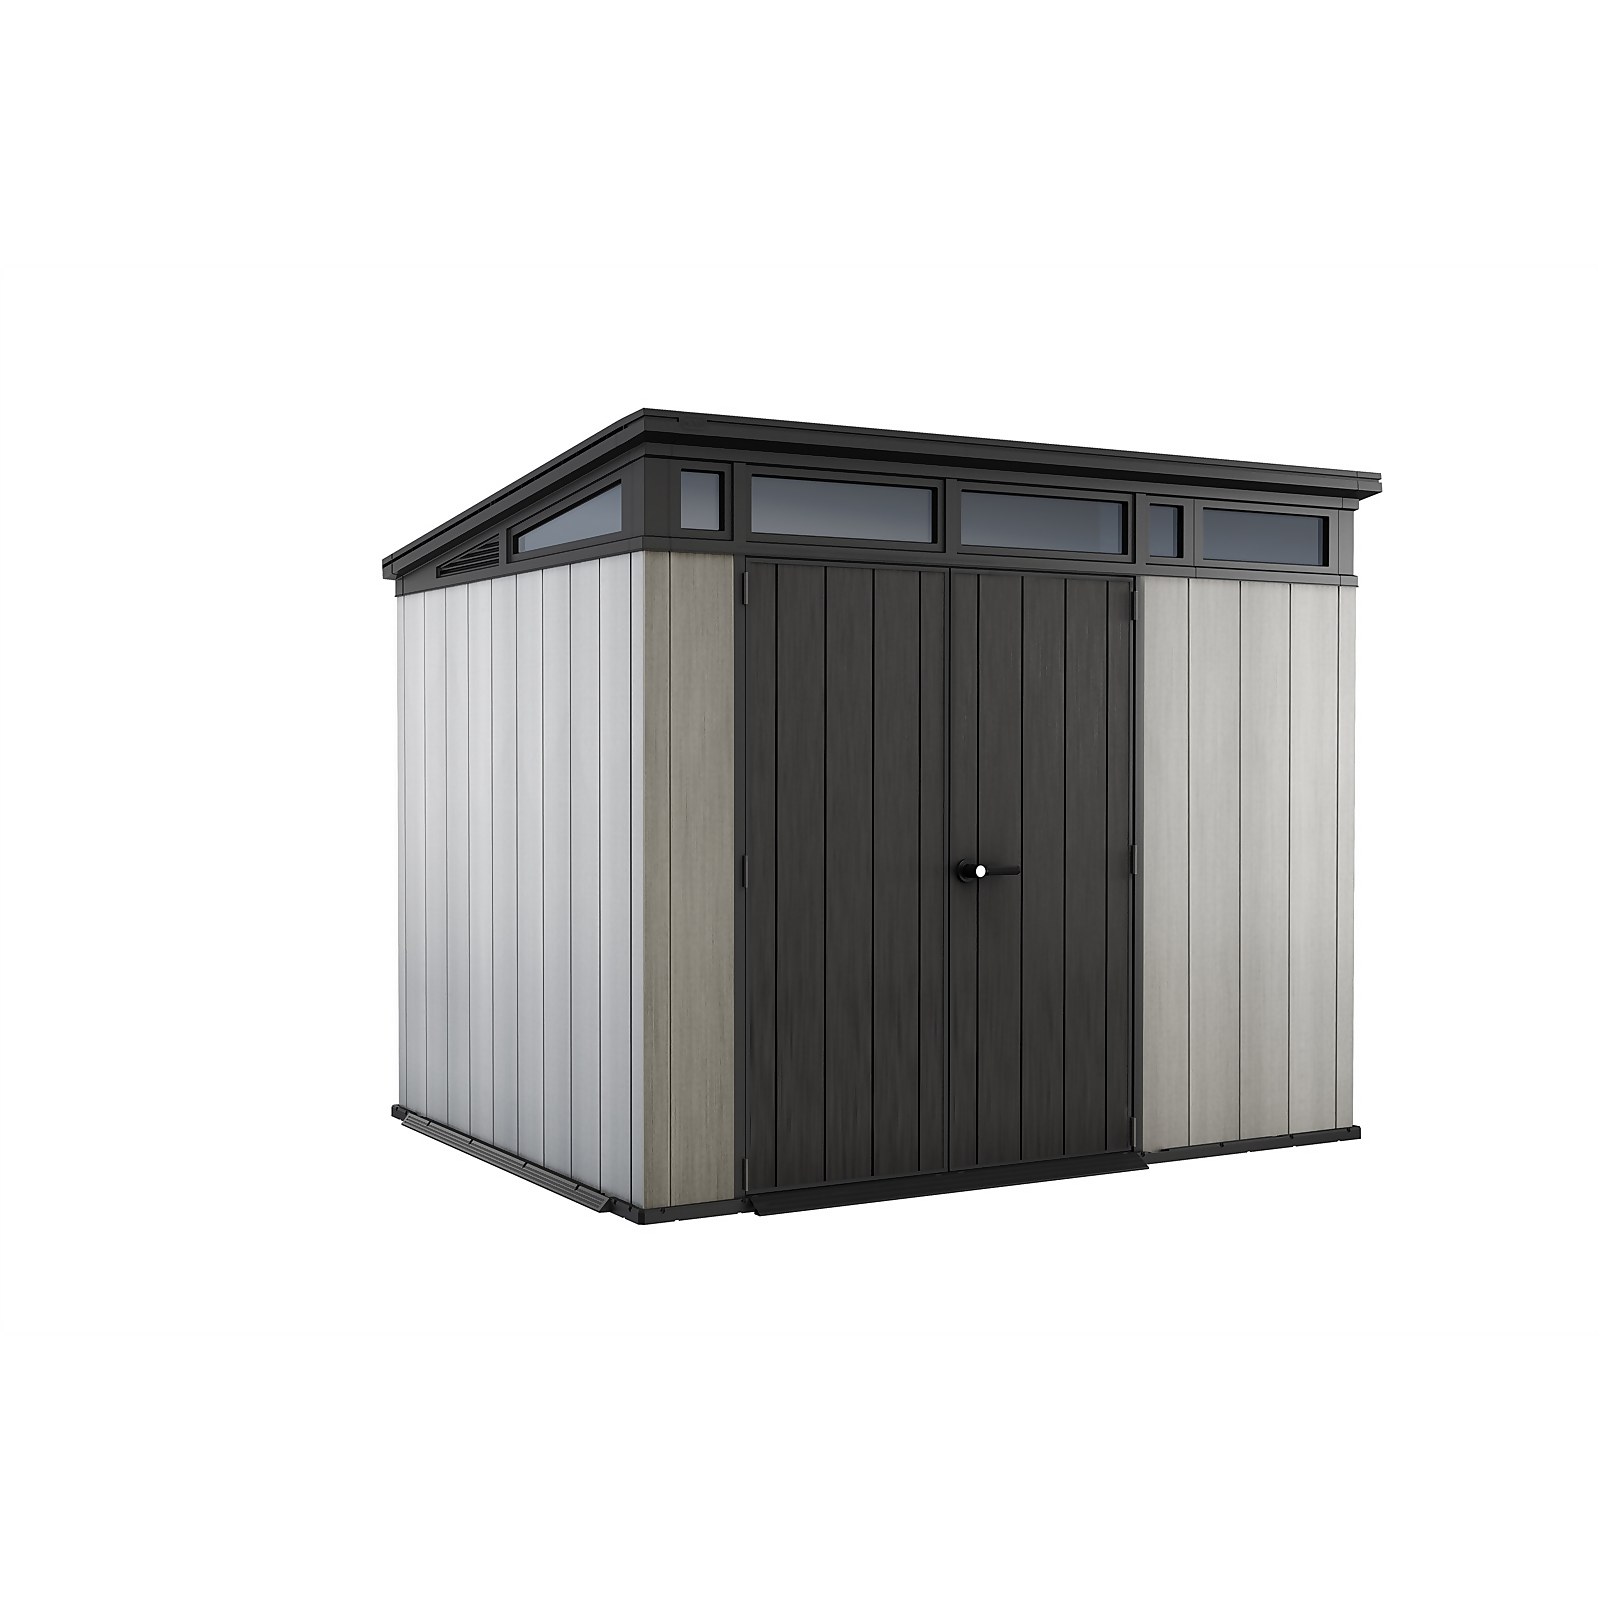 Keter Artisan Shed Best Prices Sale At B Q Wickes Homebase Argos Tesco Asda Wilko The Range Costco And Screwfix